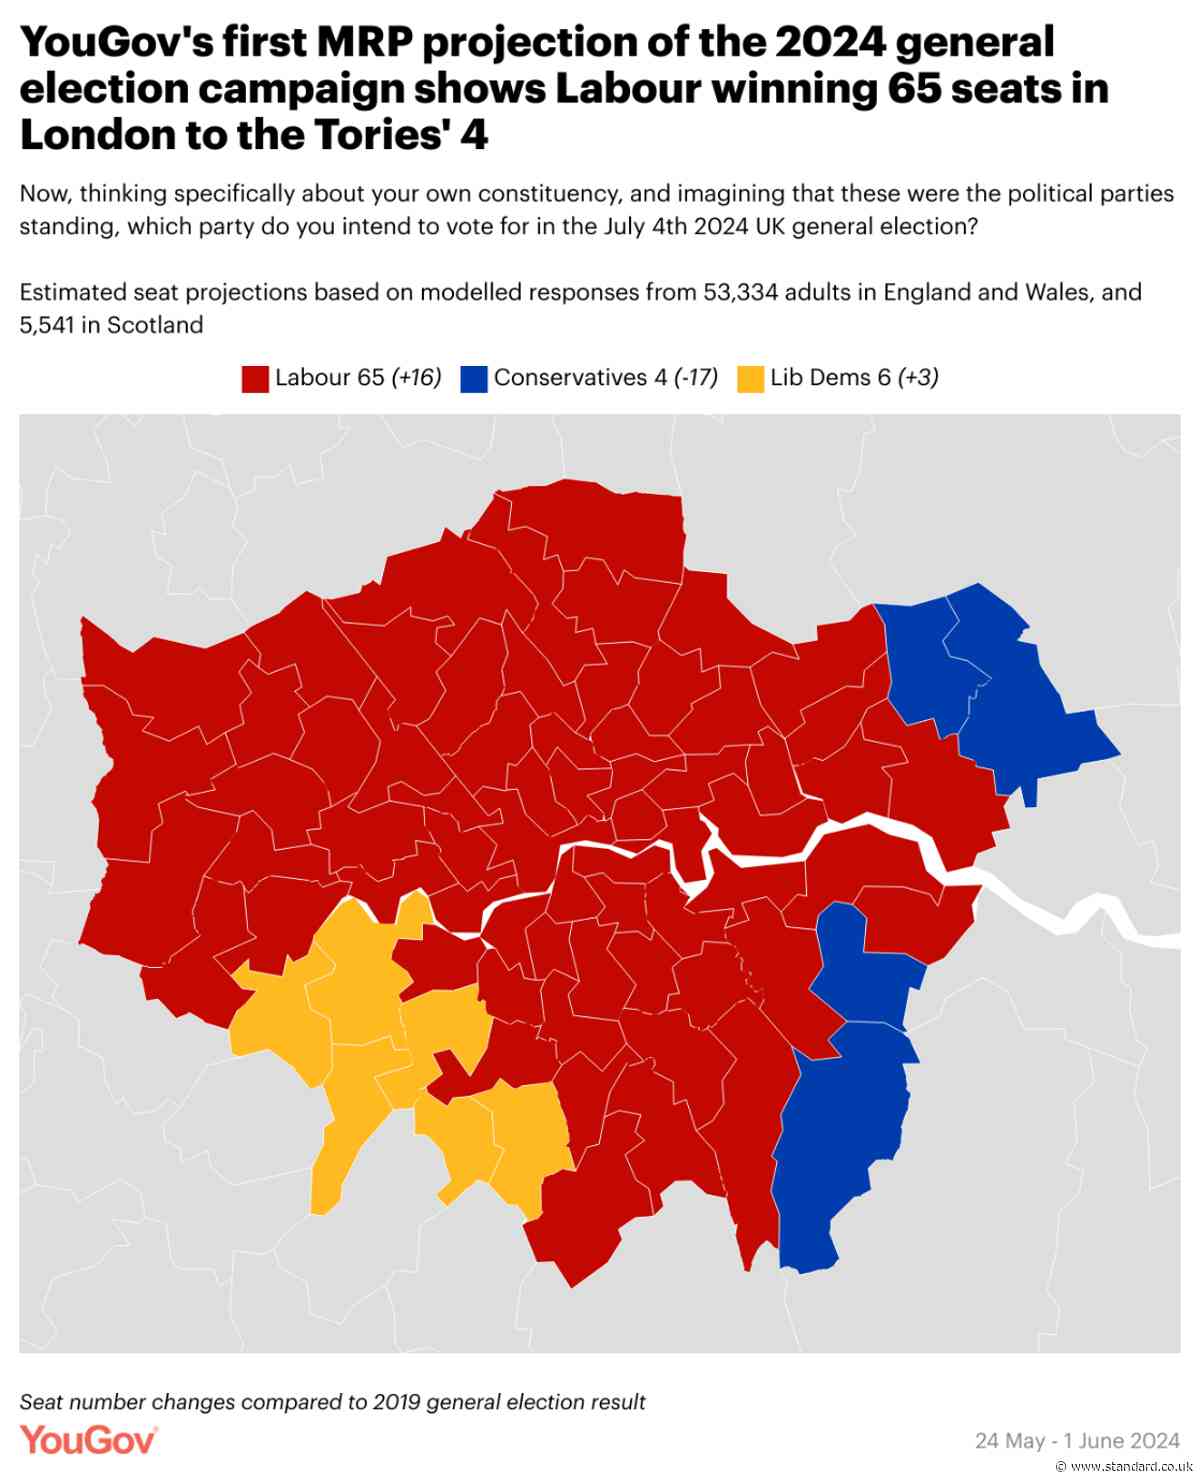 Sunak’s Tories face almost total wipeout in London in Labour election landslide bigger than Blair’s, new poll